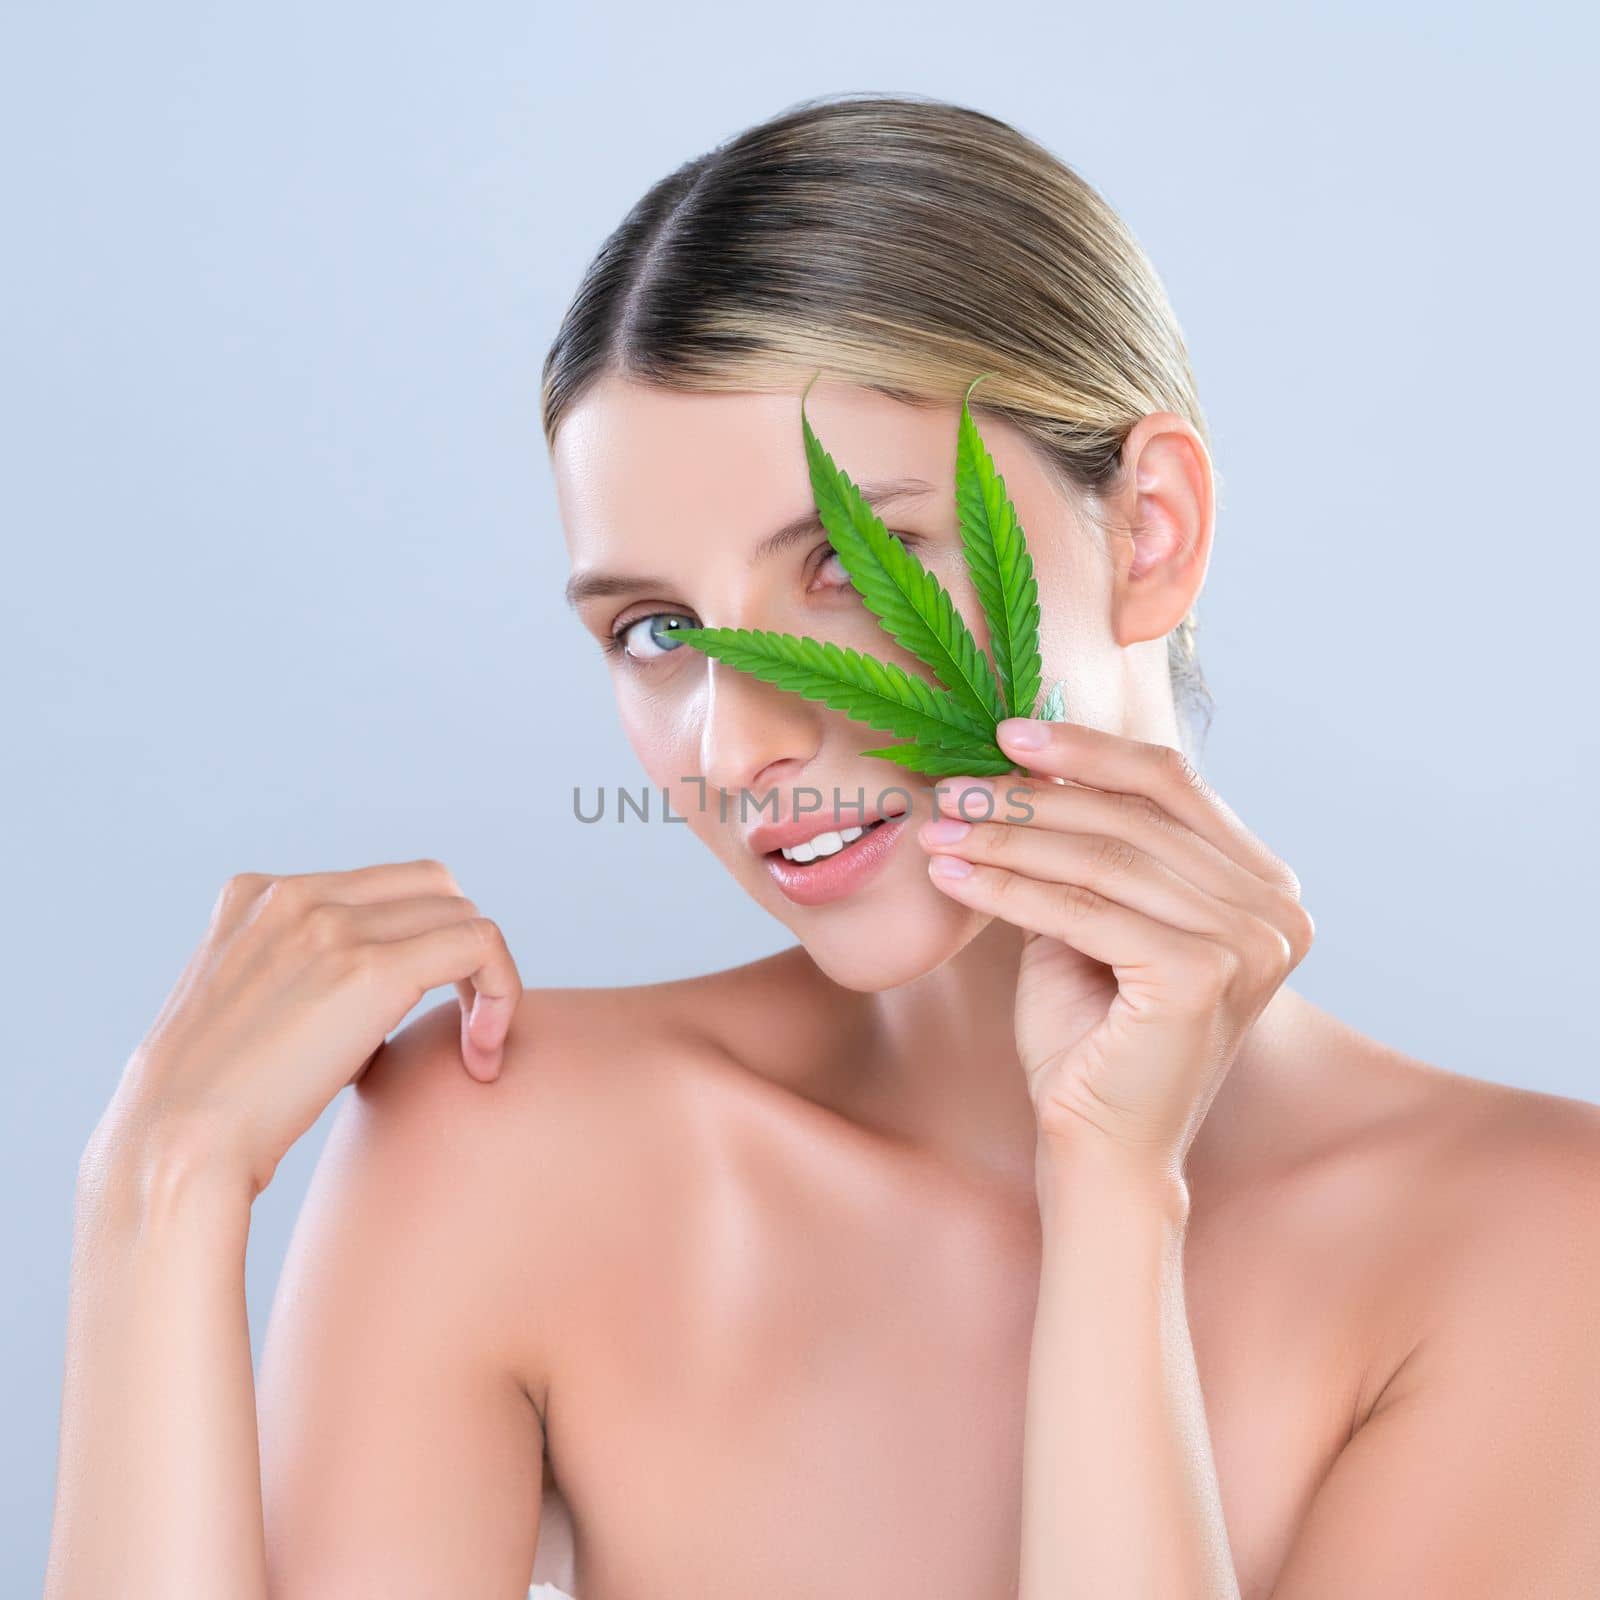 Alluring beautiful woman model portrait holding green leaf as concept for cannabis skincare cosmetic product for skin freshness treatment in isolated background.